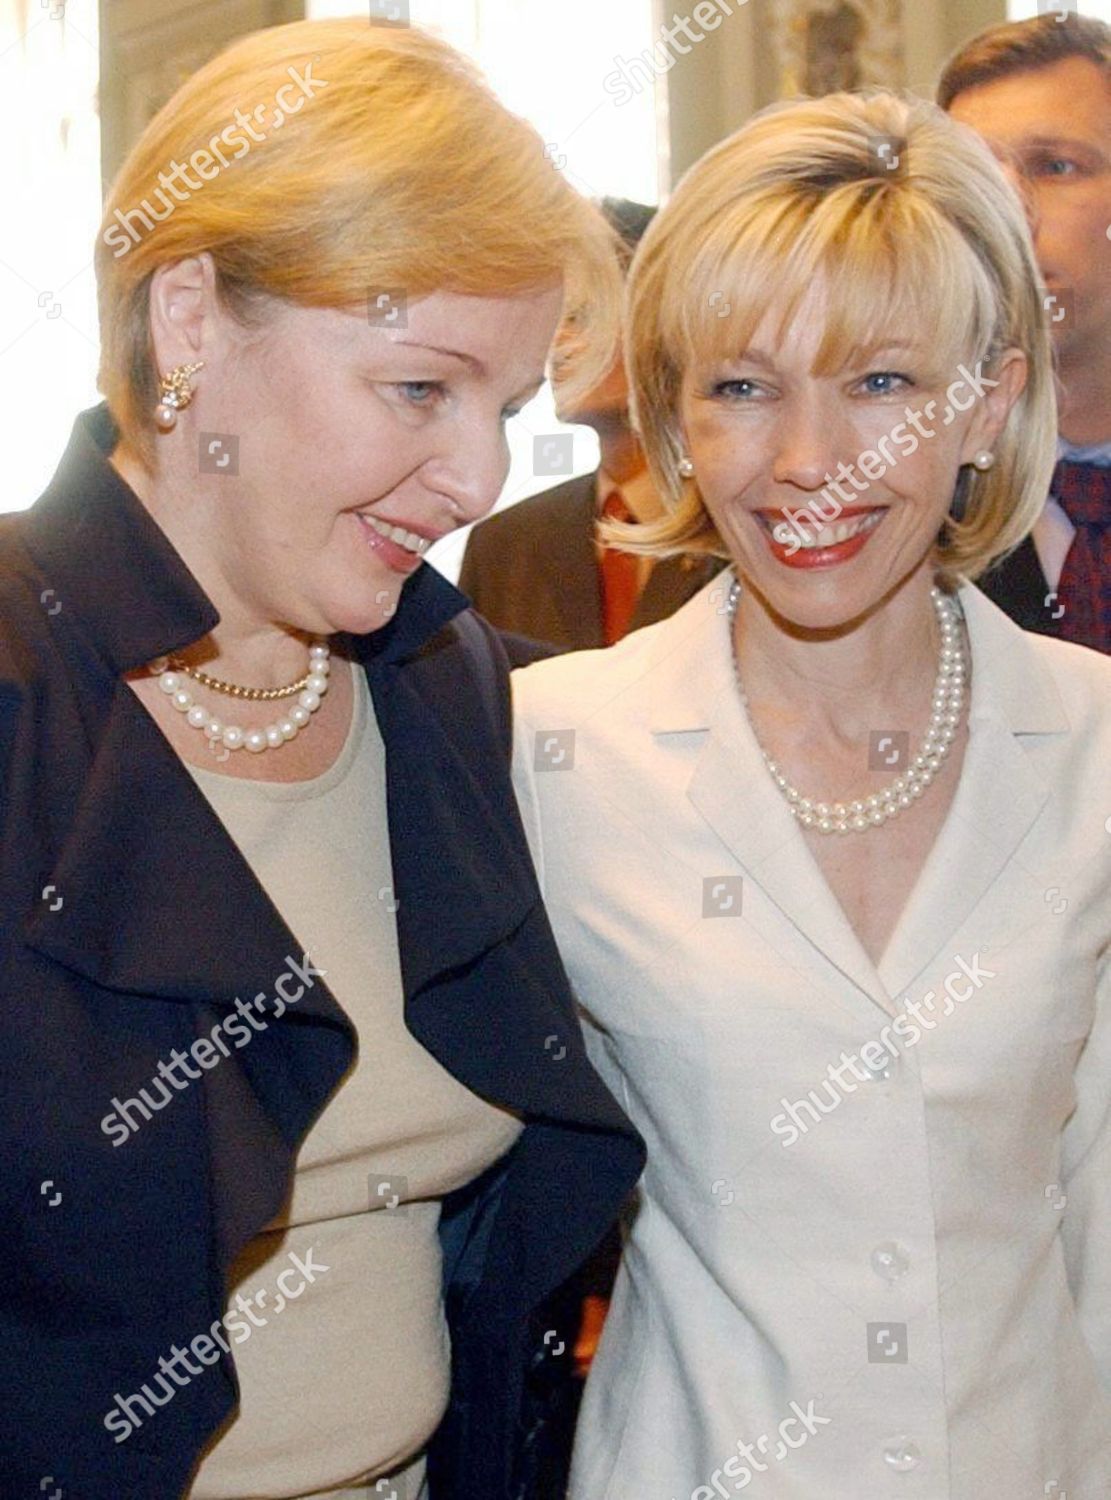 germany-russia-first-ladies-youth-meeting-jun-2003-shutterstock-editorial-8251121a.jpg